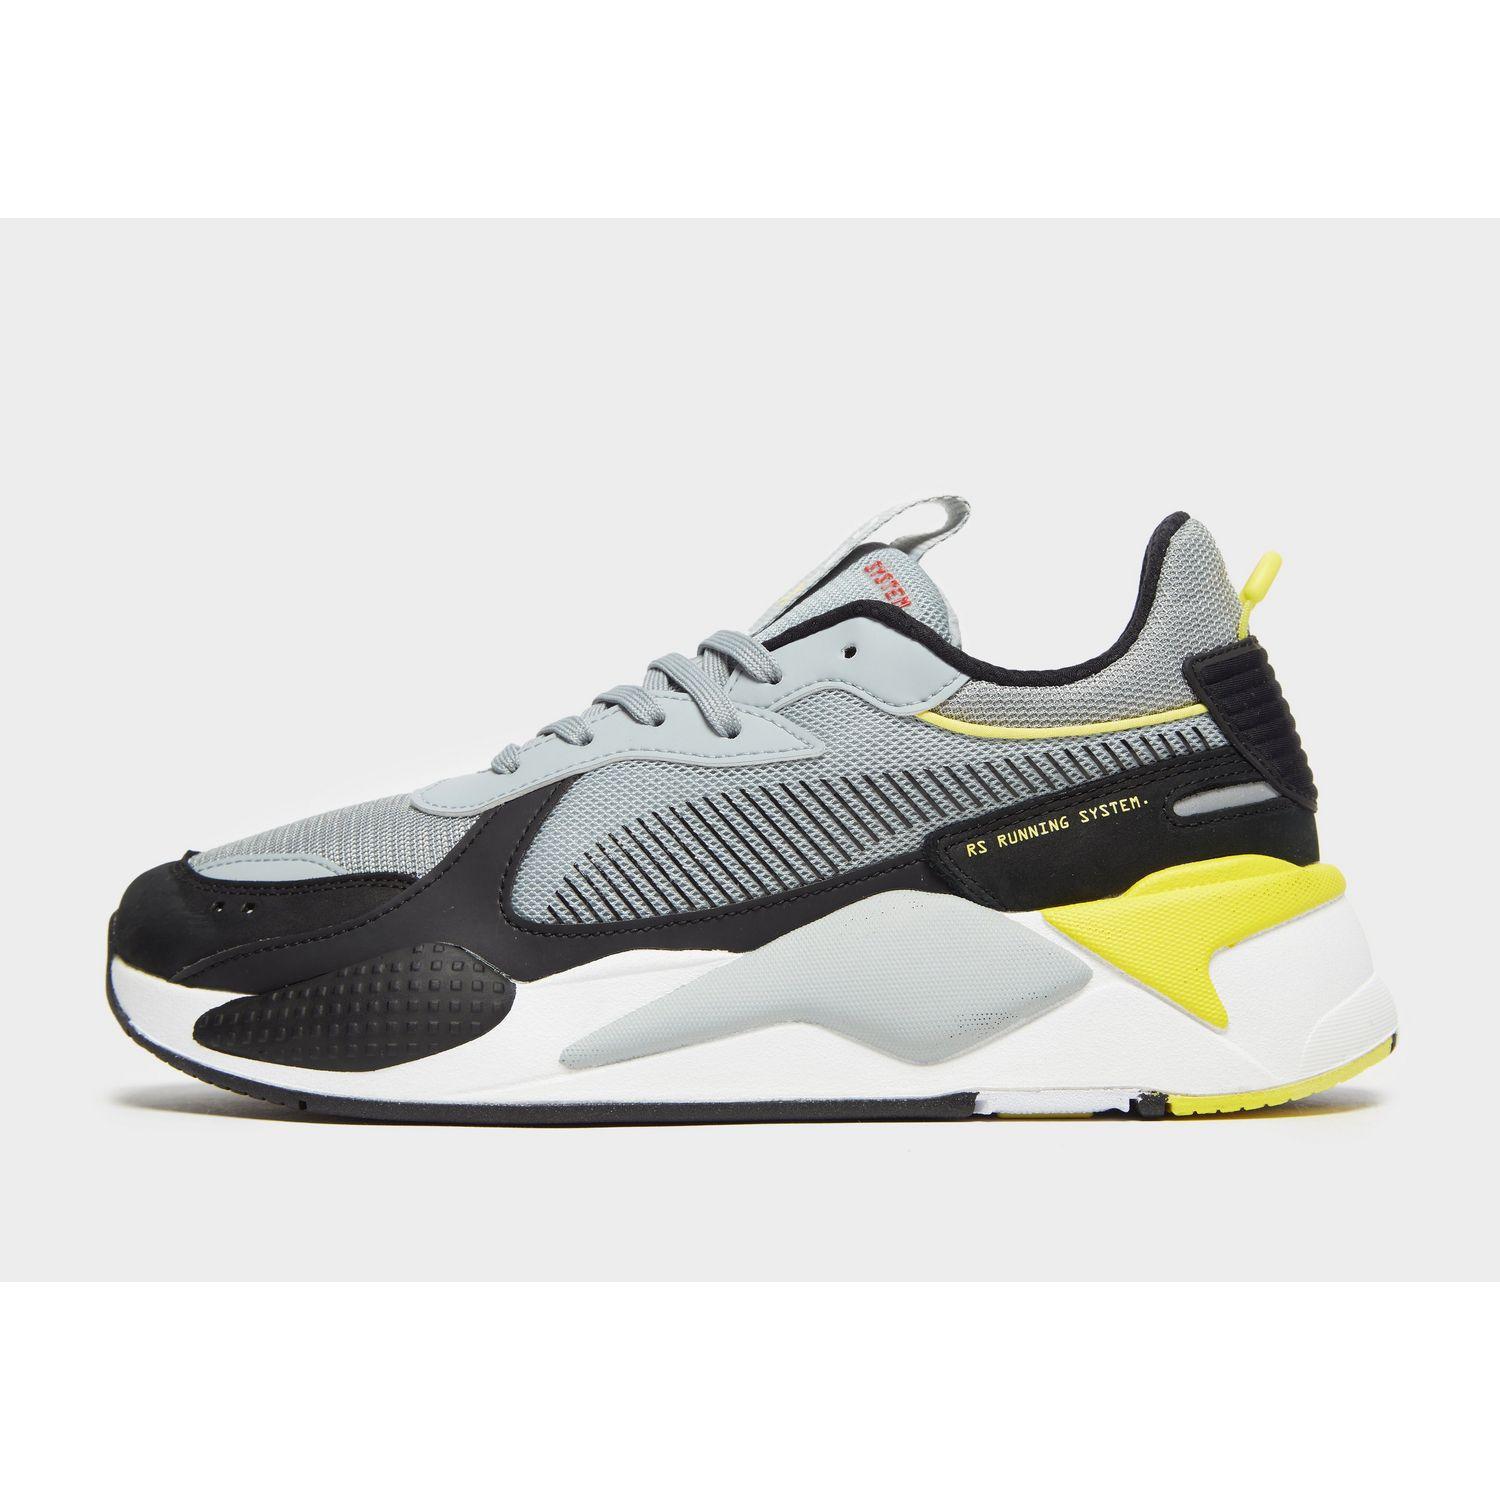 PUMA Synthetic Rs-x Cr in Grey/Black 